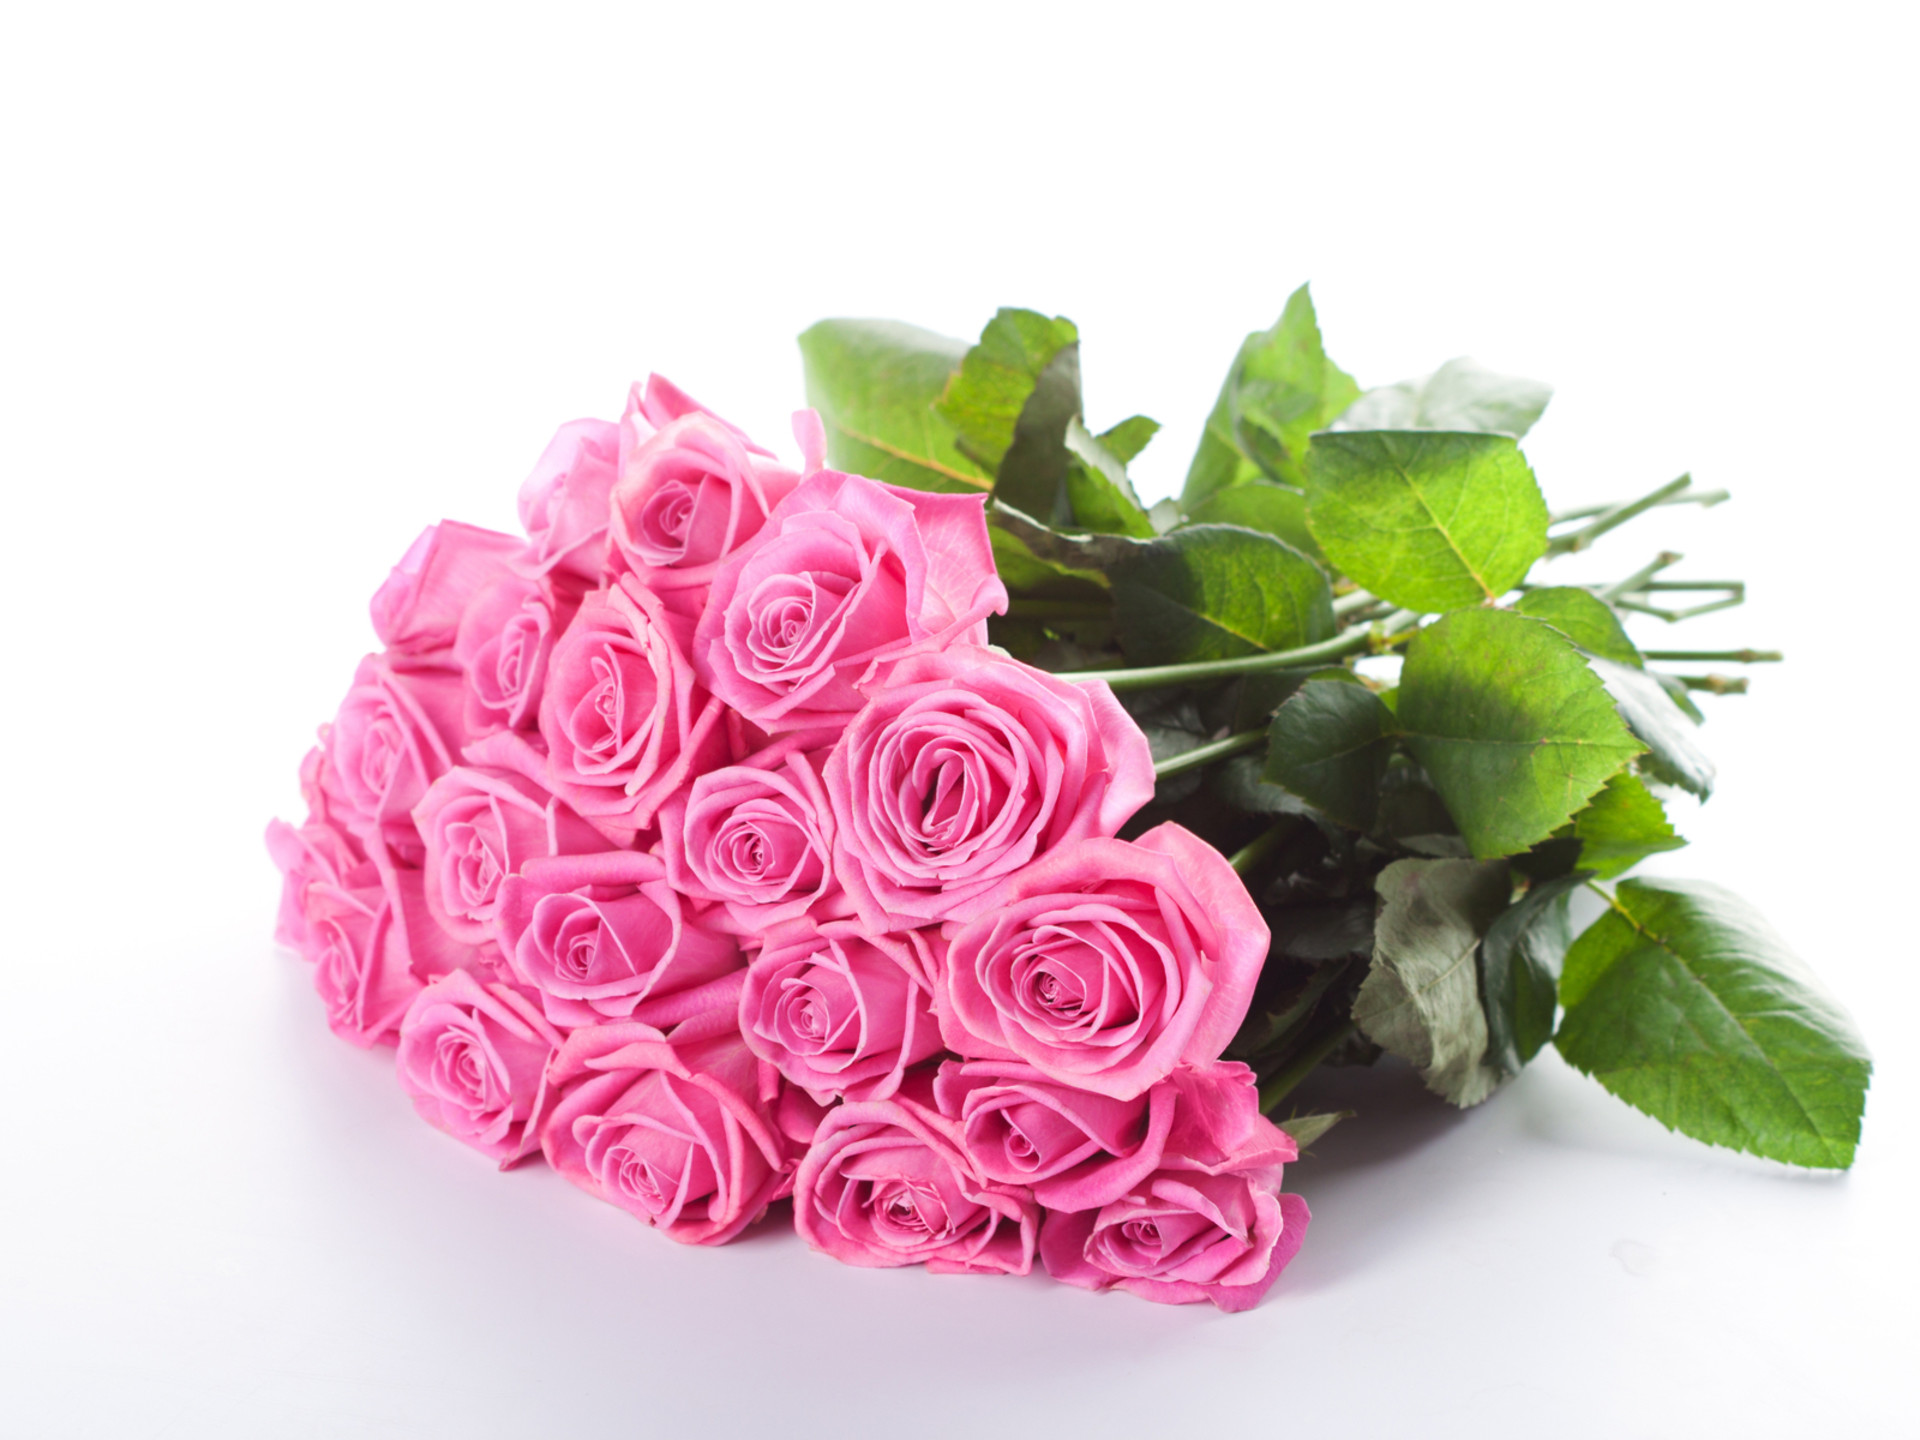 1920x1440 Pretty Pink Roses wallpapers and stock photos